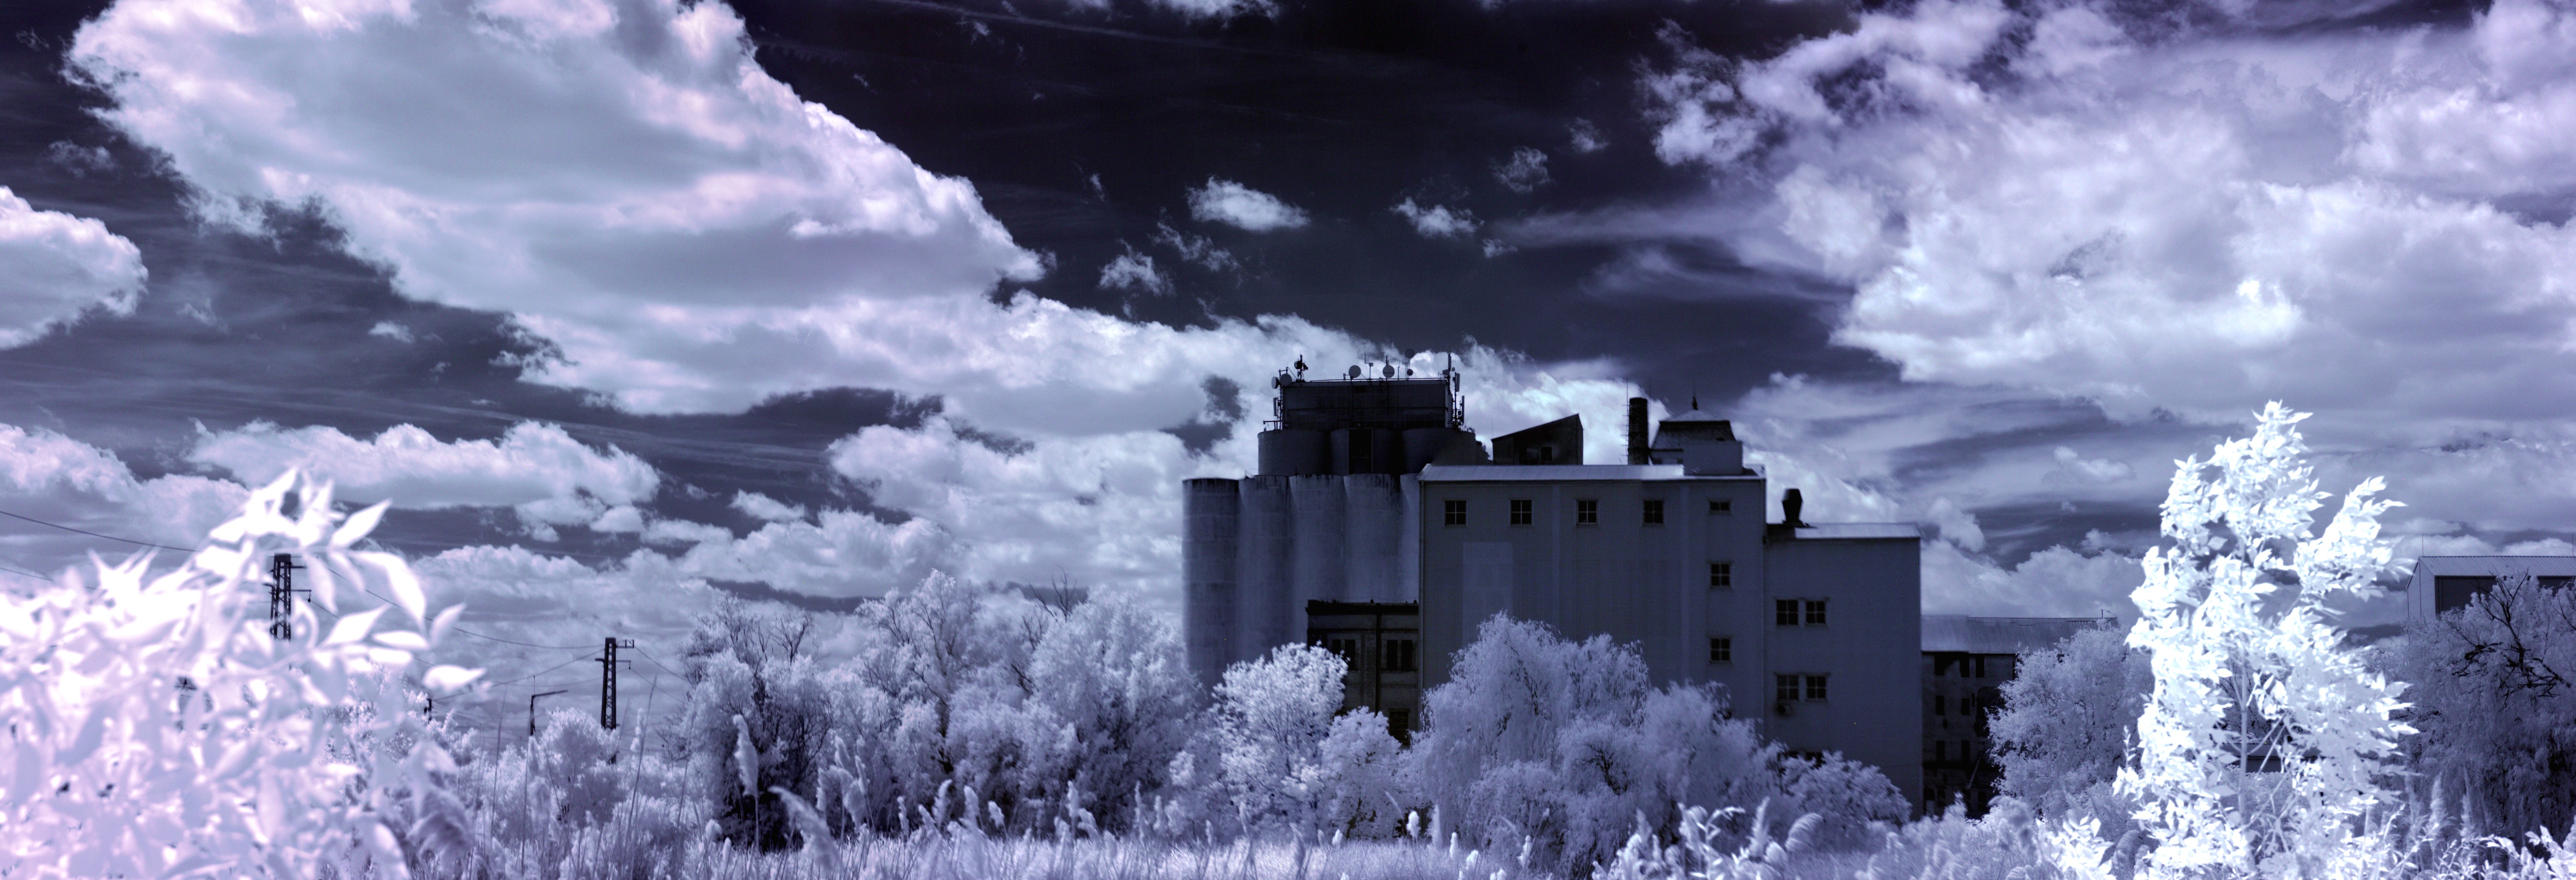 General 6326x2162 infrared building nature trees clouds